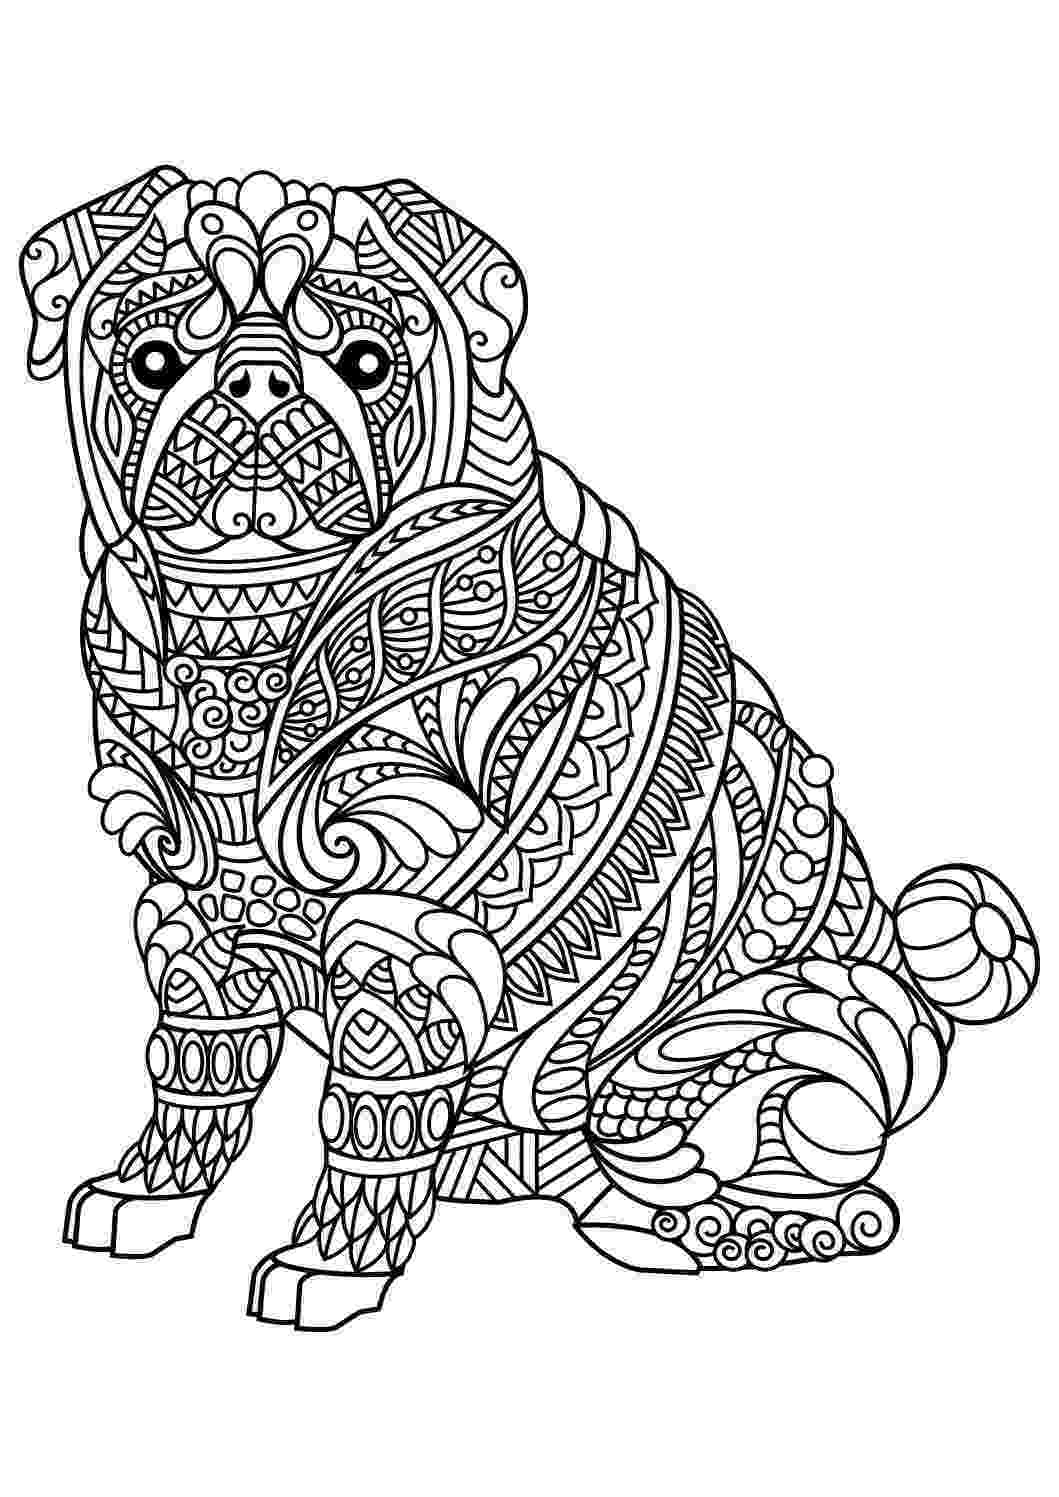 animal coloring pages adults monkey by pauline animals coloring pages for adults animal pages coloring adults 